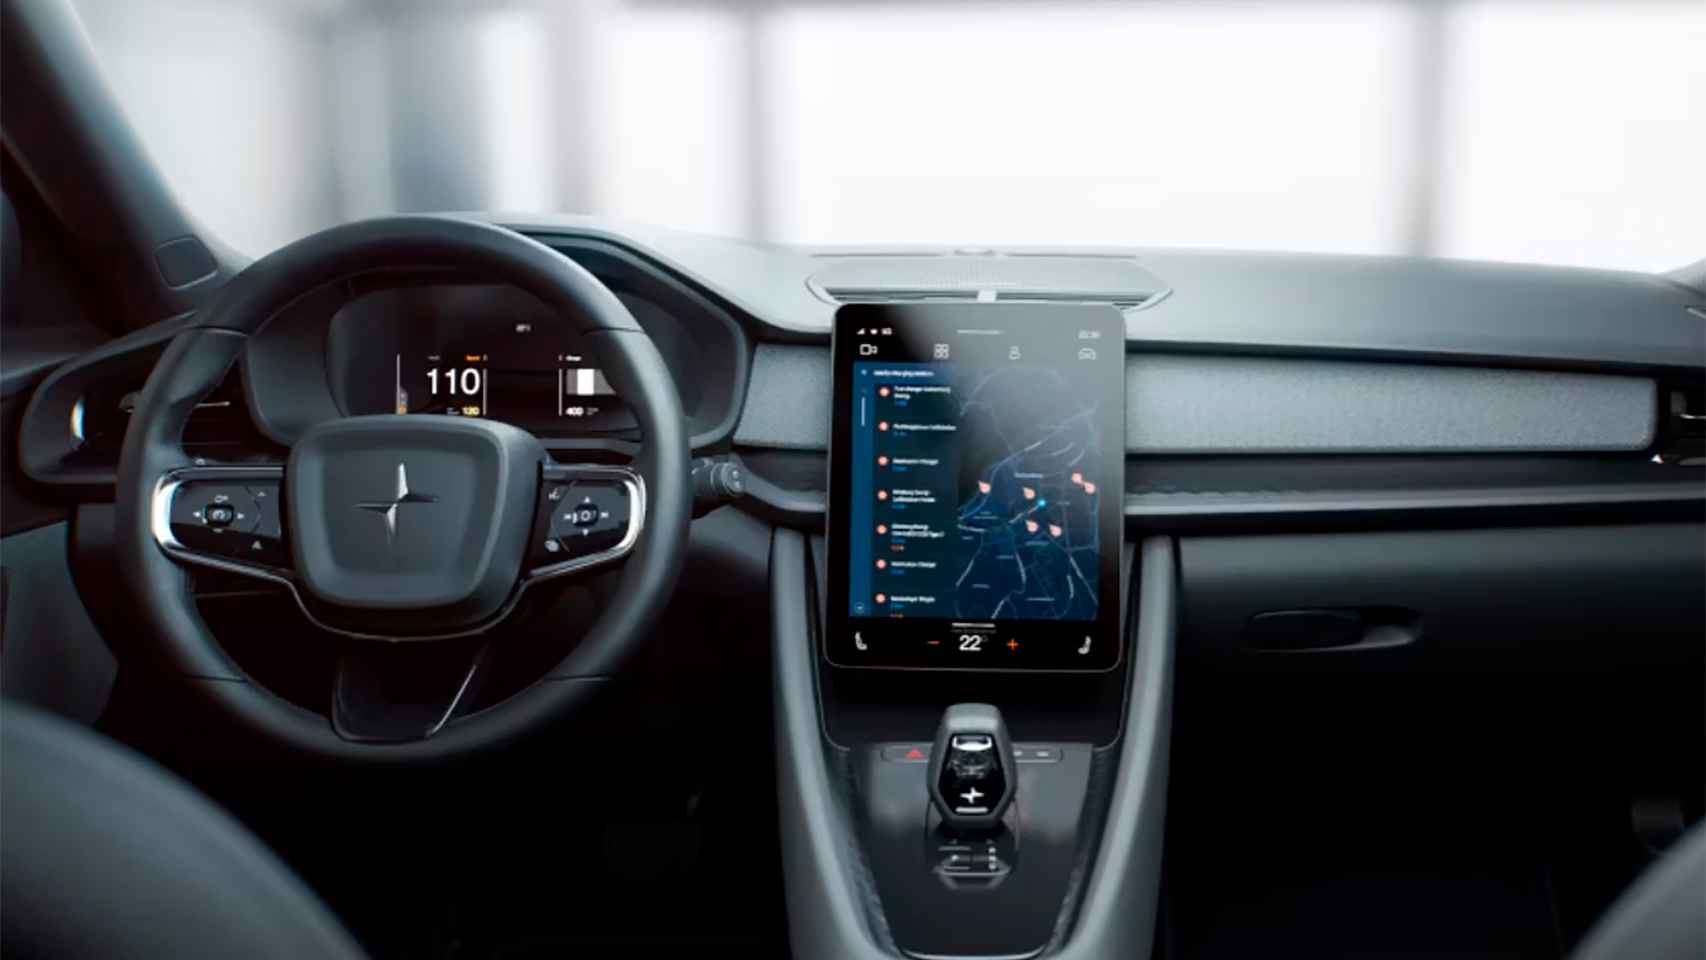 Android Automotive 13